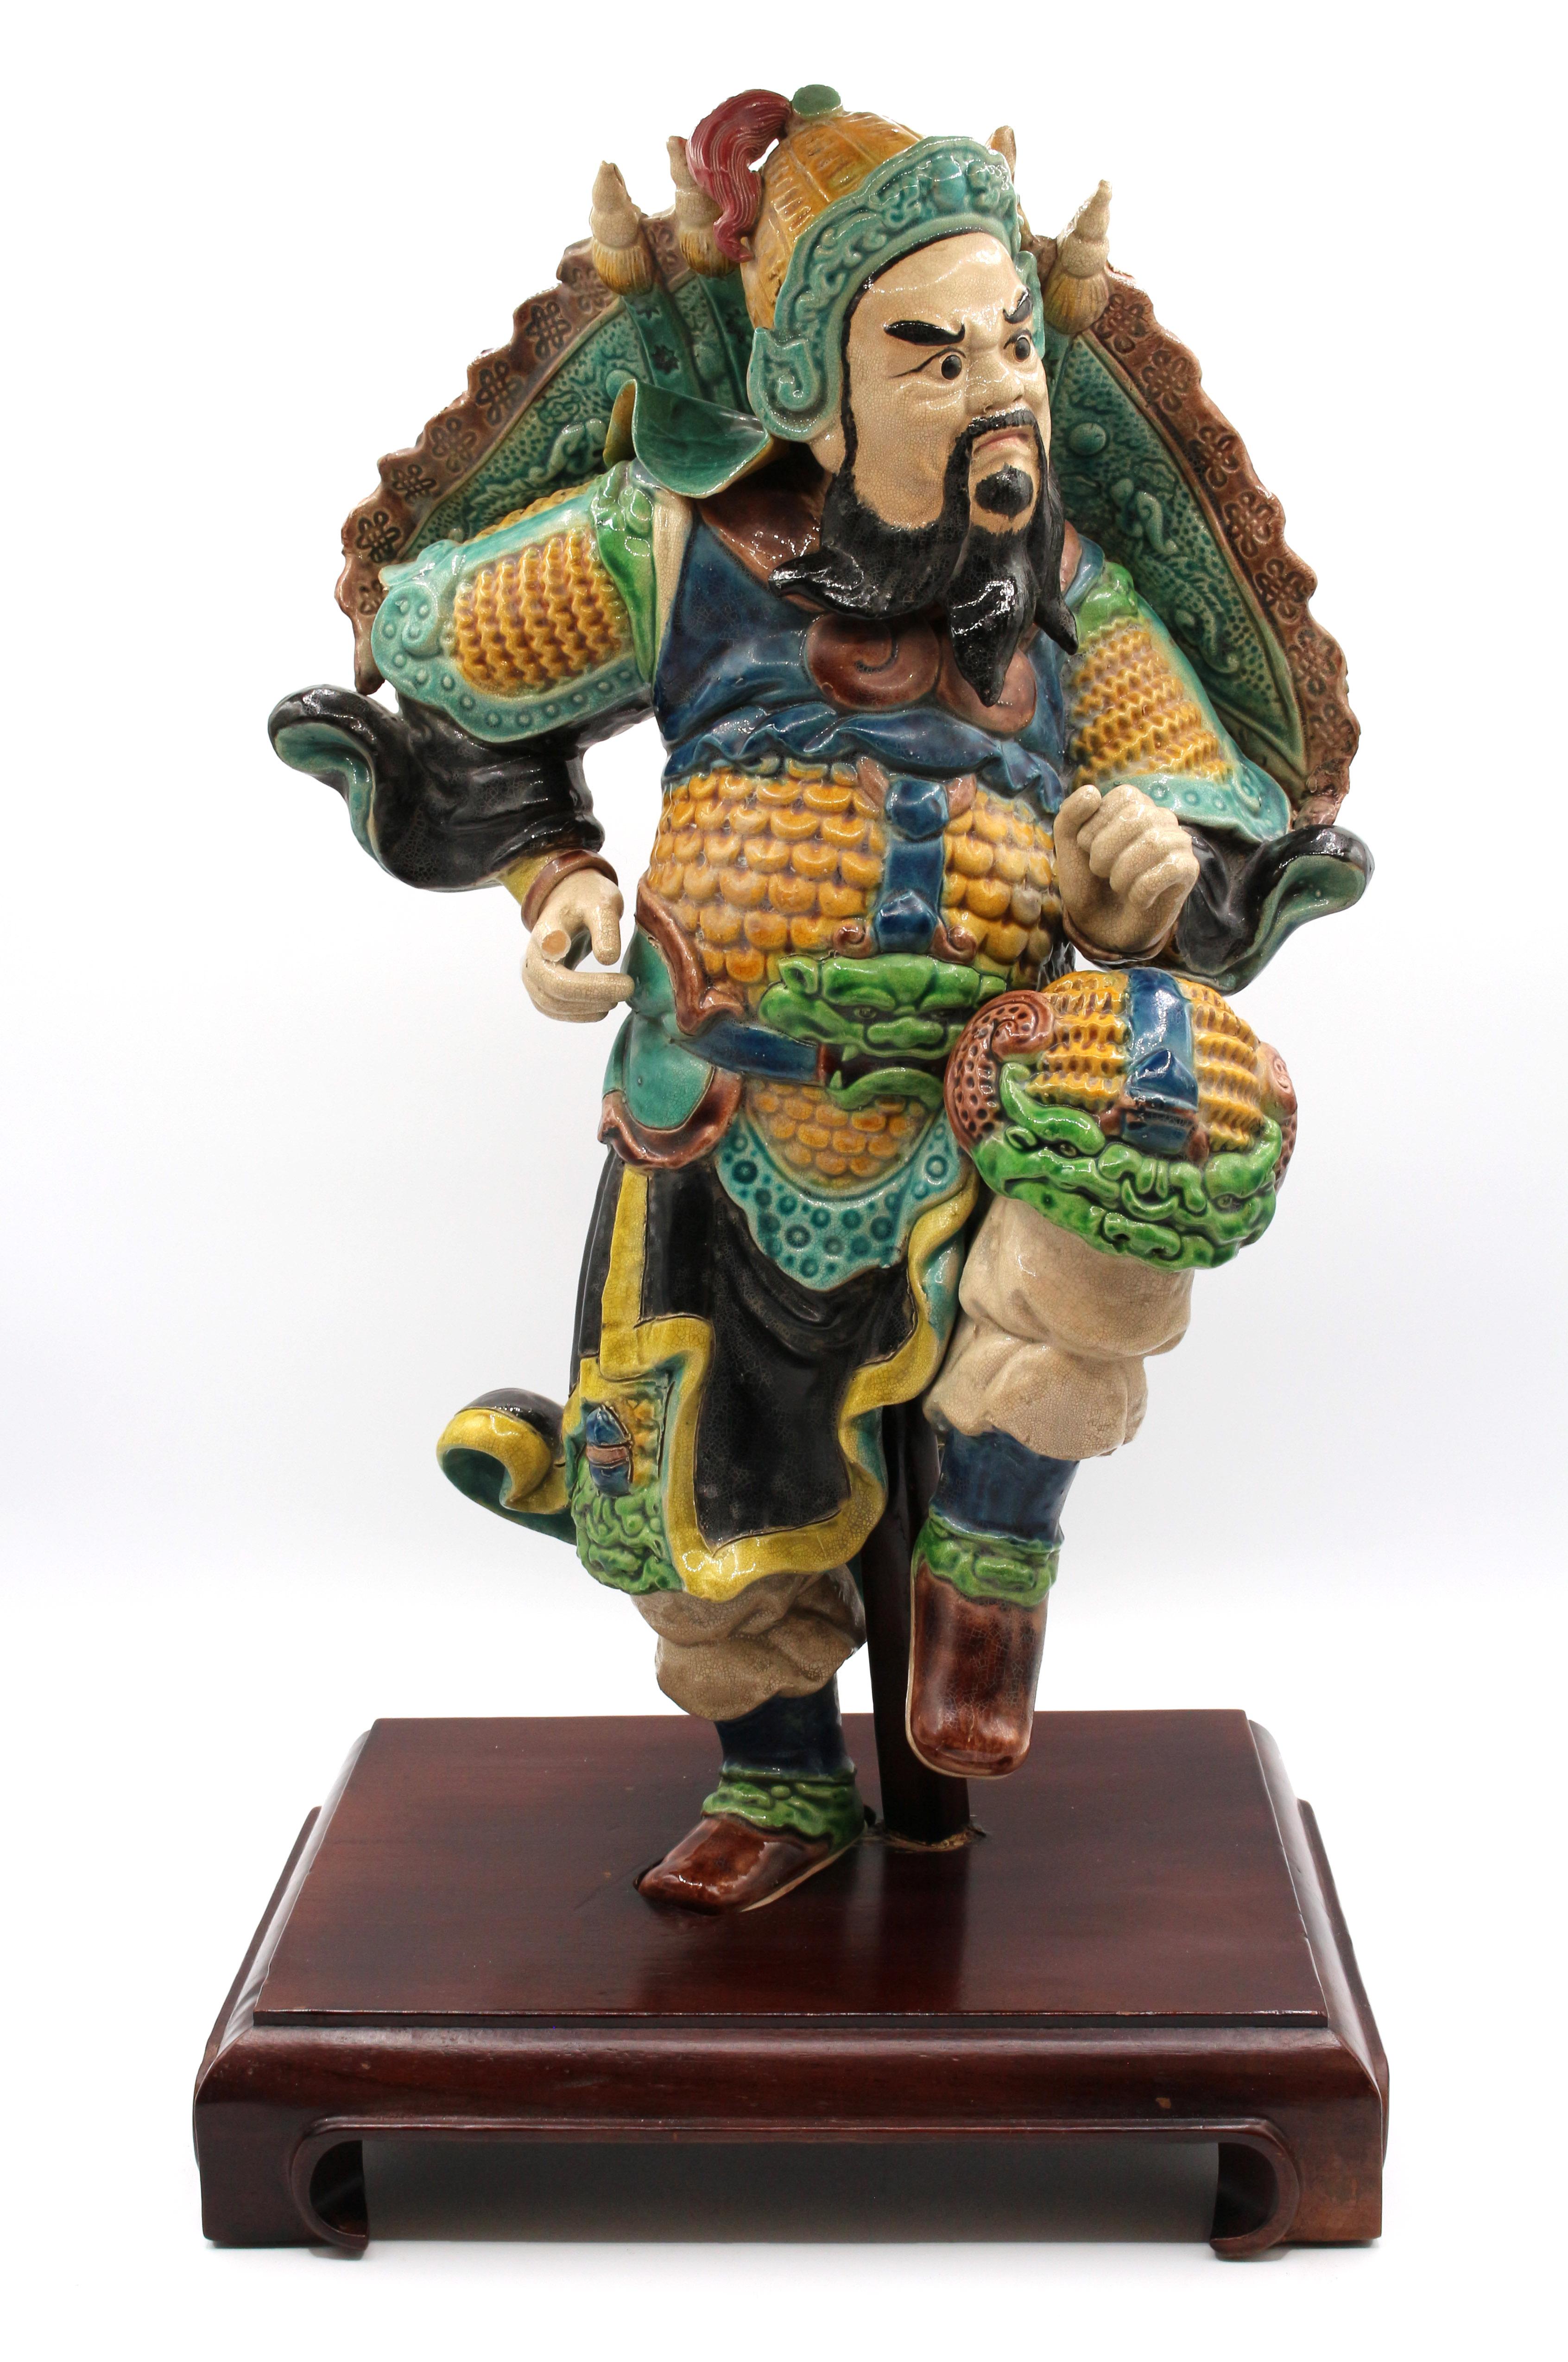 Late 19th century roof tile figure, Chinese. Polychrome glazed stoneware pottery. A man in dramatic pose, apparently in battle gear replete with foo dog head knee protectors. One finger missing, otherwise normal wear & degrading commensurate with